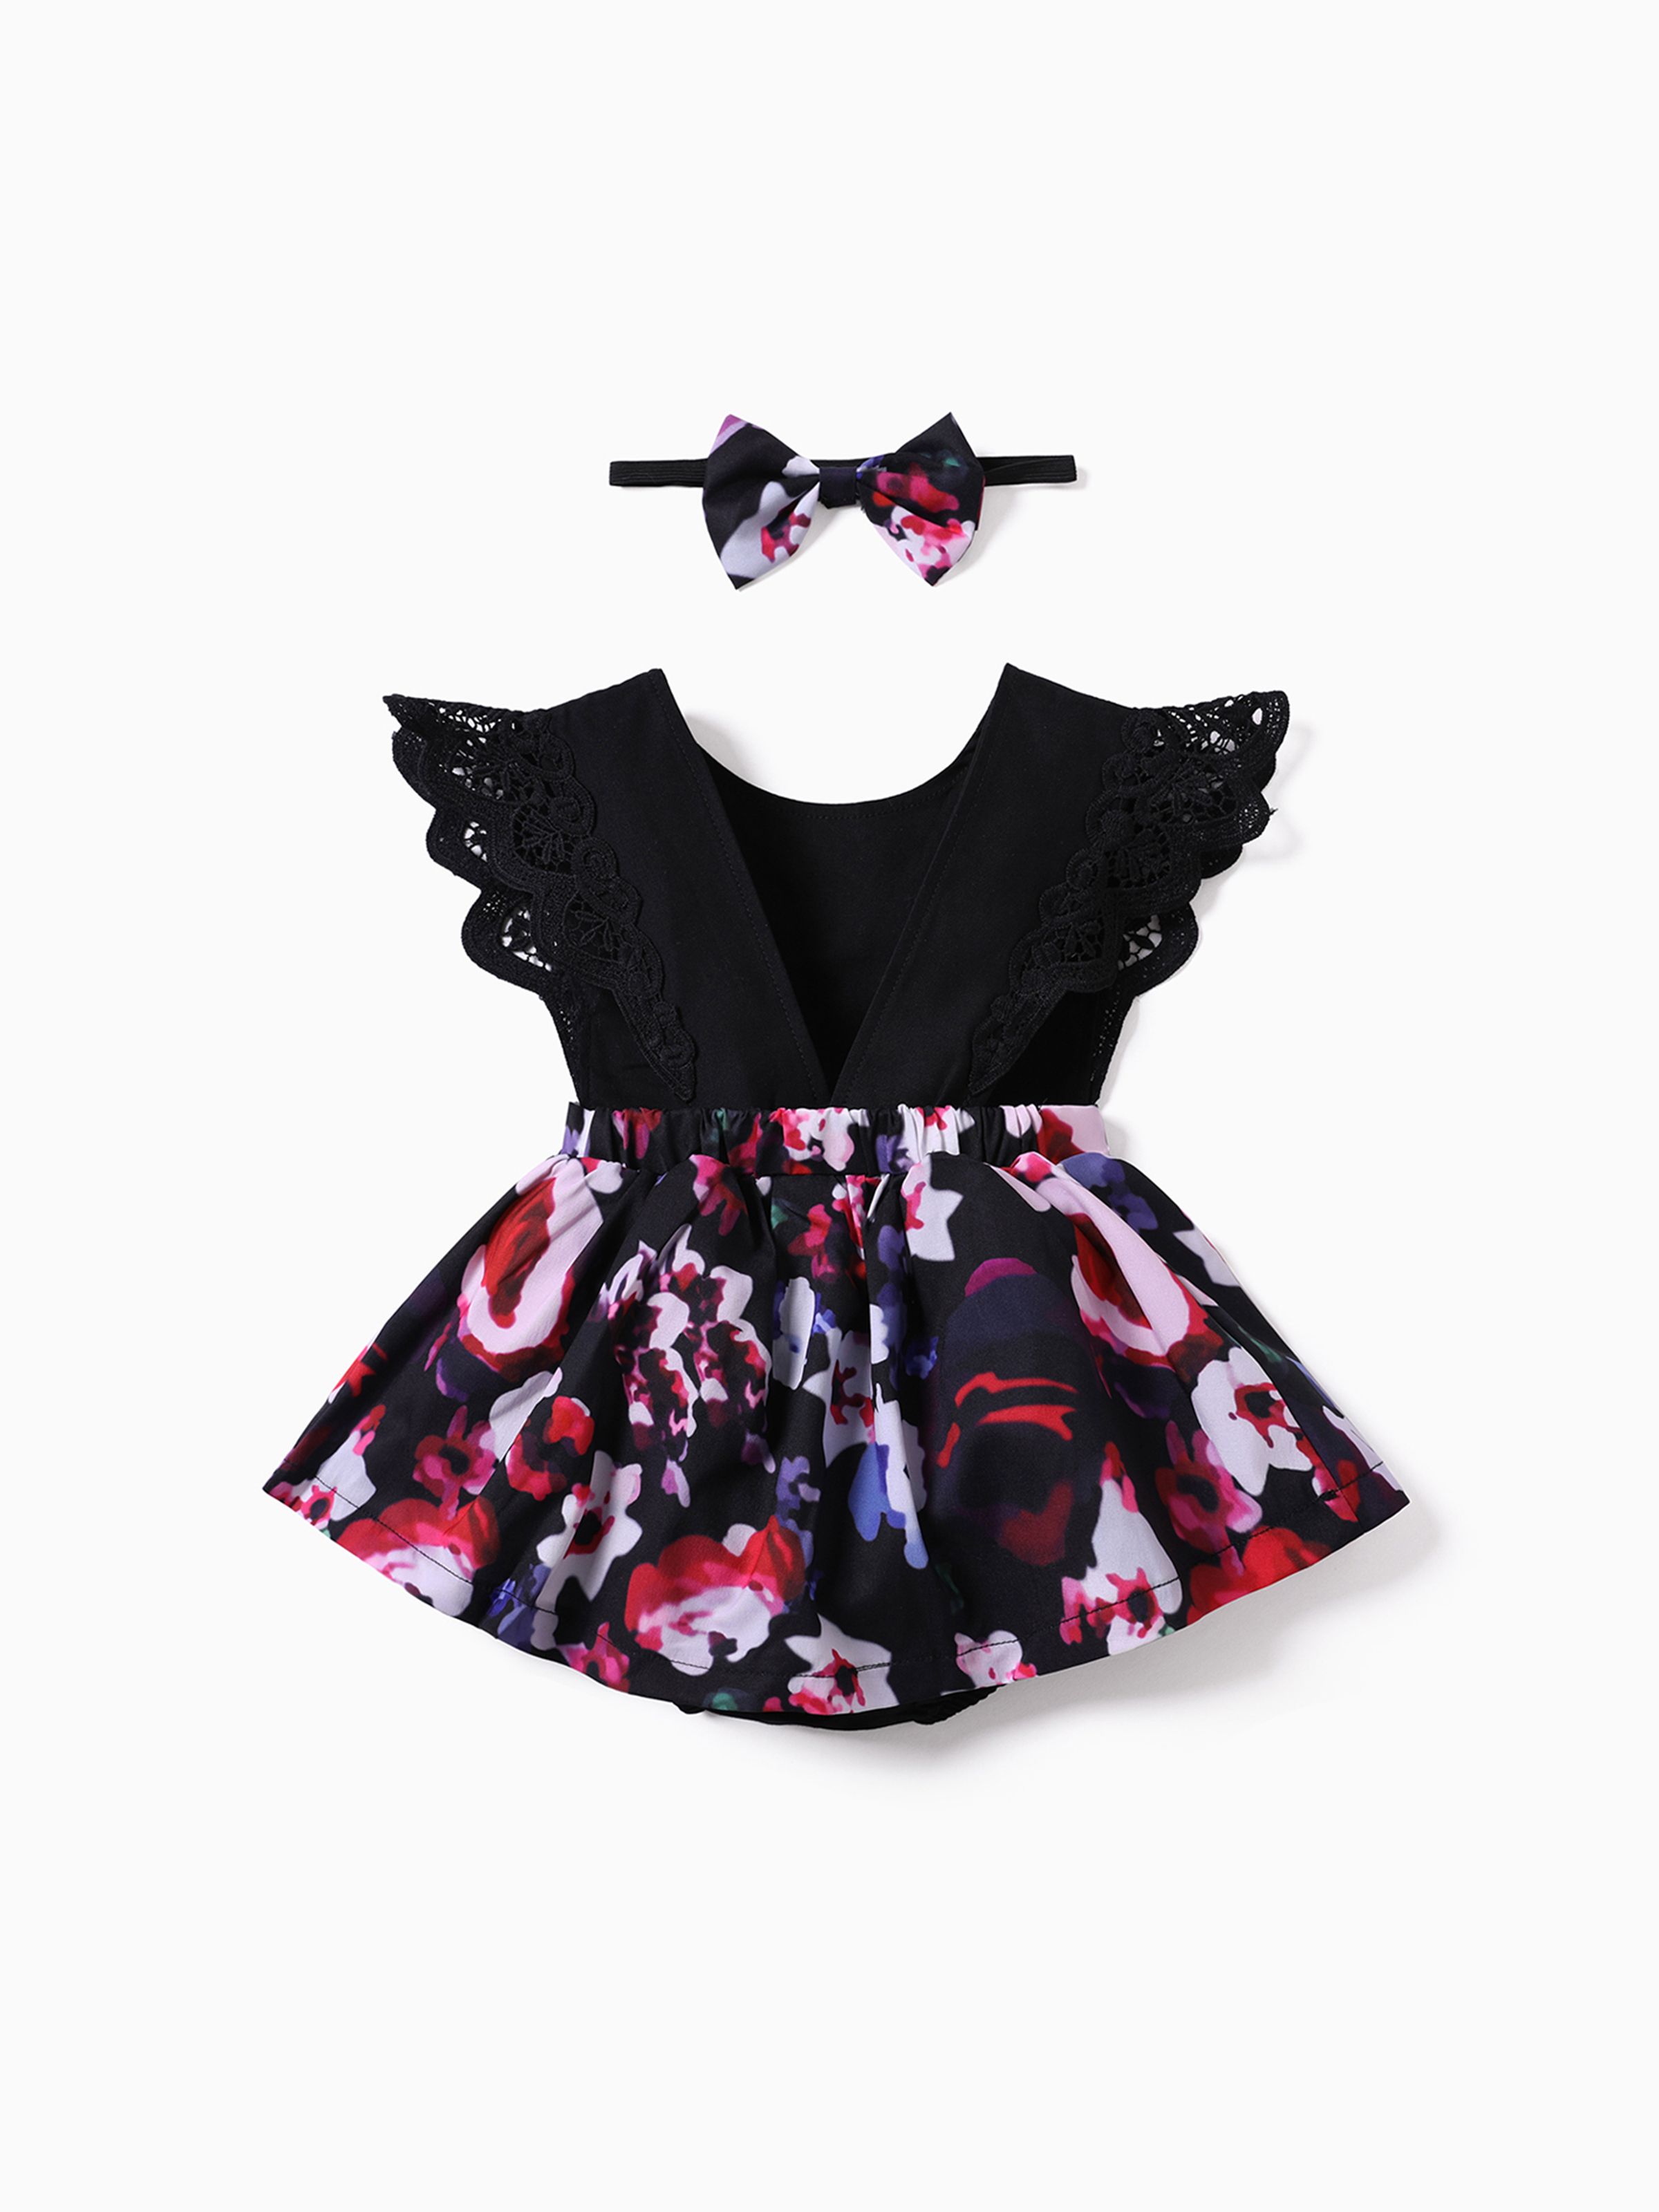 

2pcs Baby Girl 95% Cotton Lace Flutter-sleeve Floral Print Romper with Headband Set